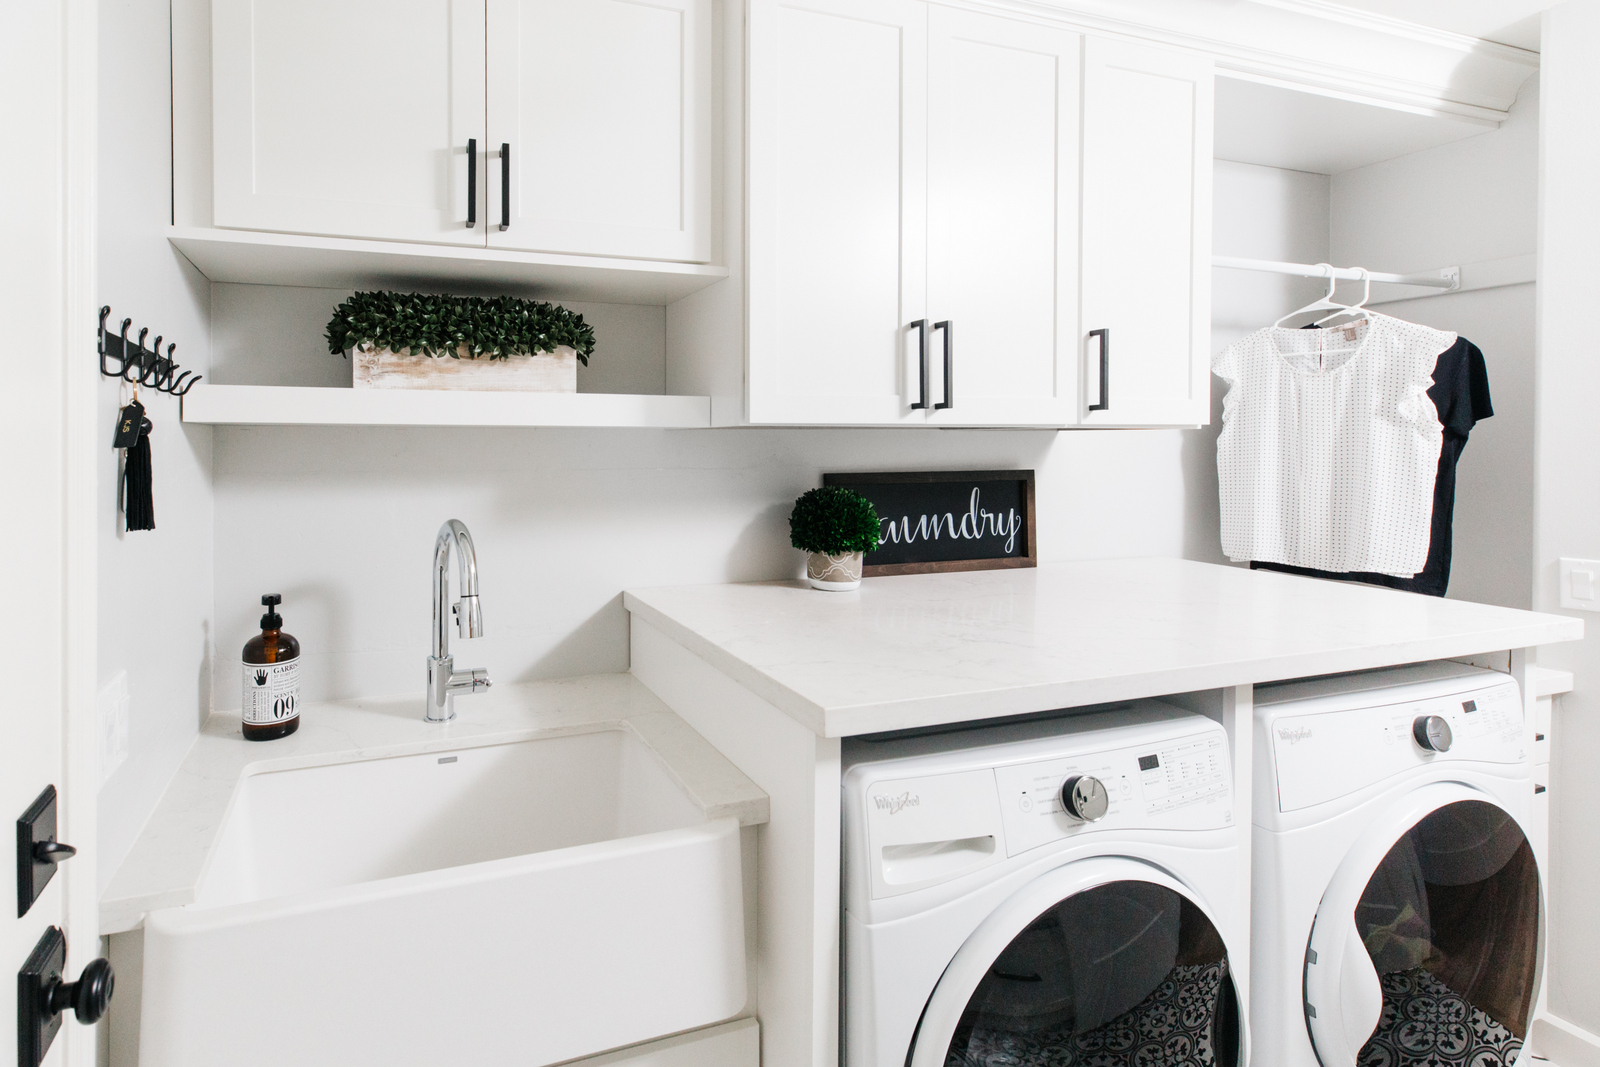 Laundry Room + Mudroom Reveal: Our House Remodel | The TomKat Studio Blog